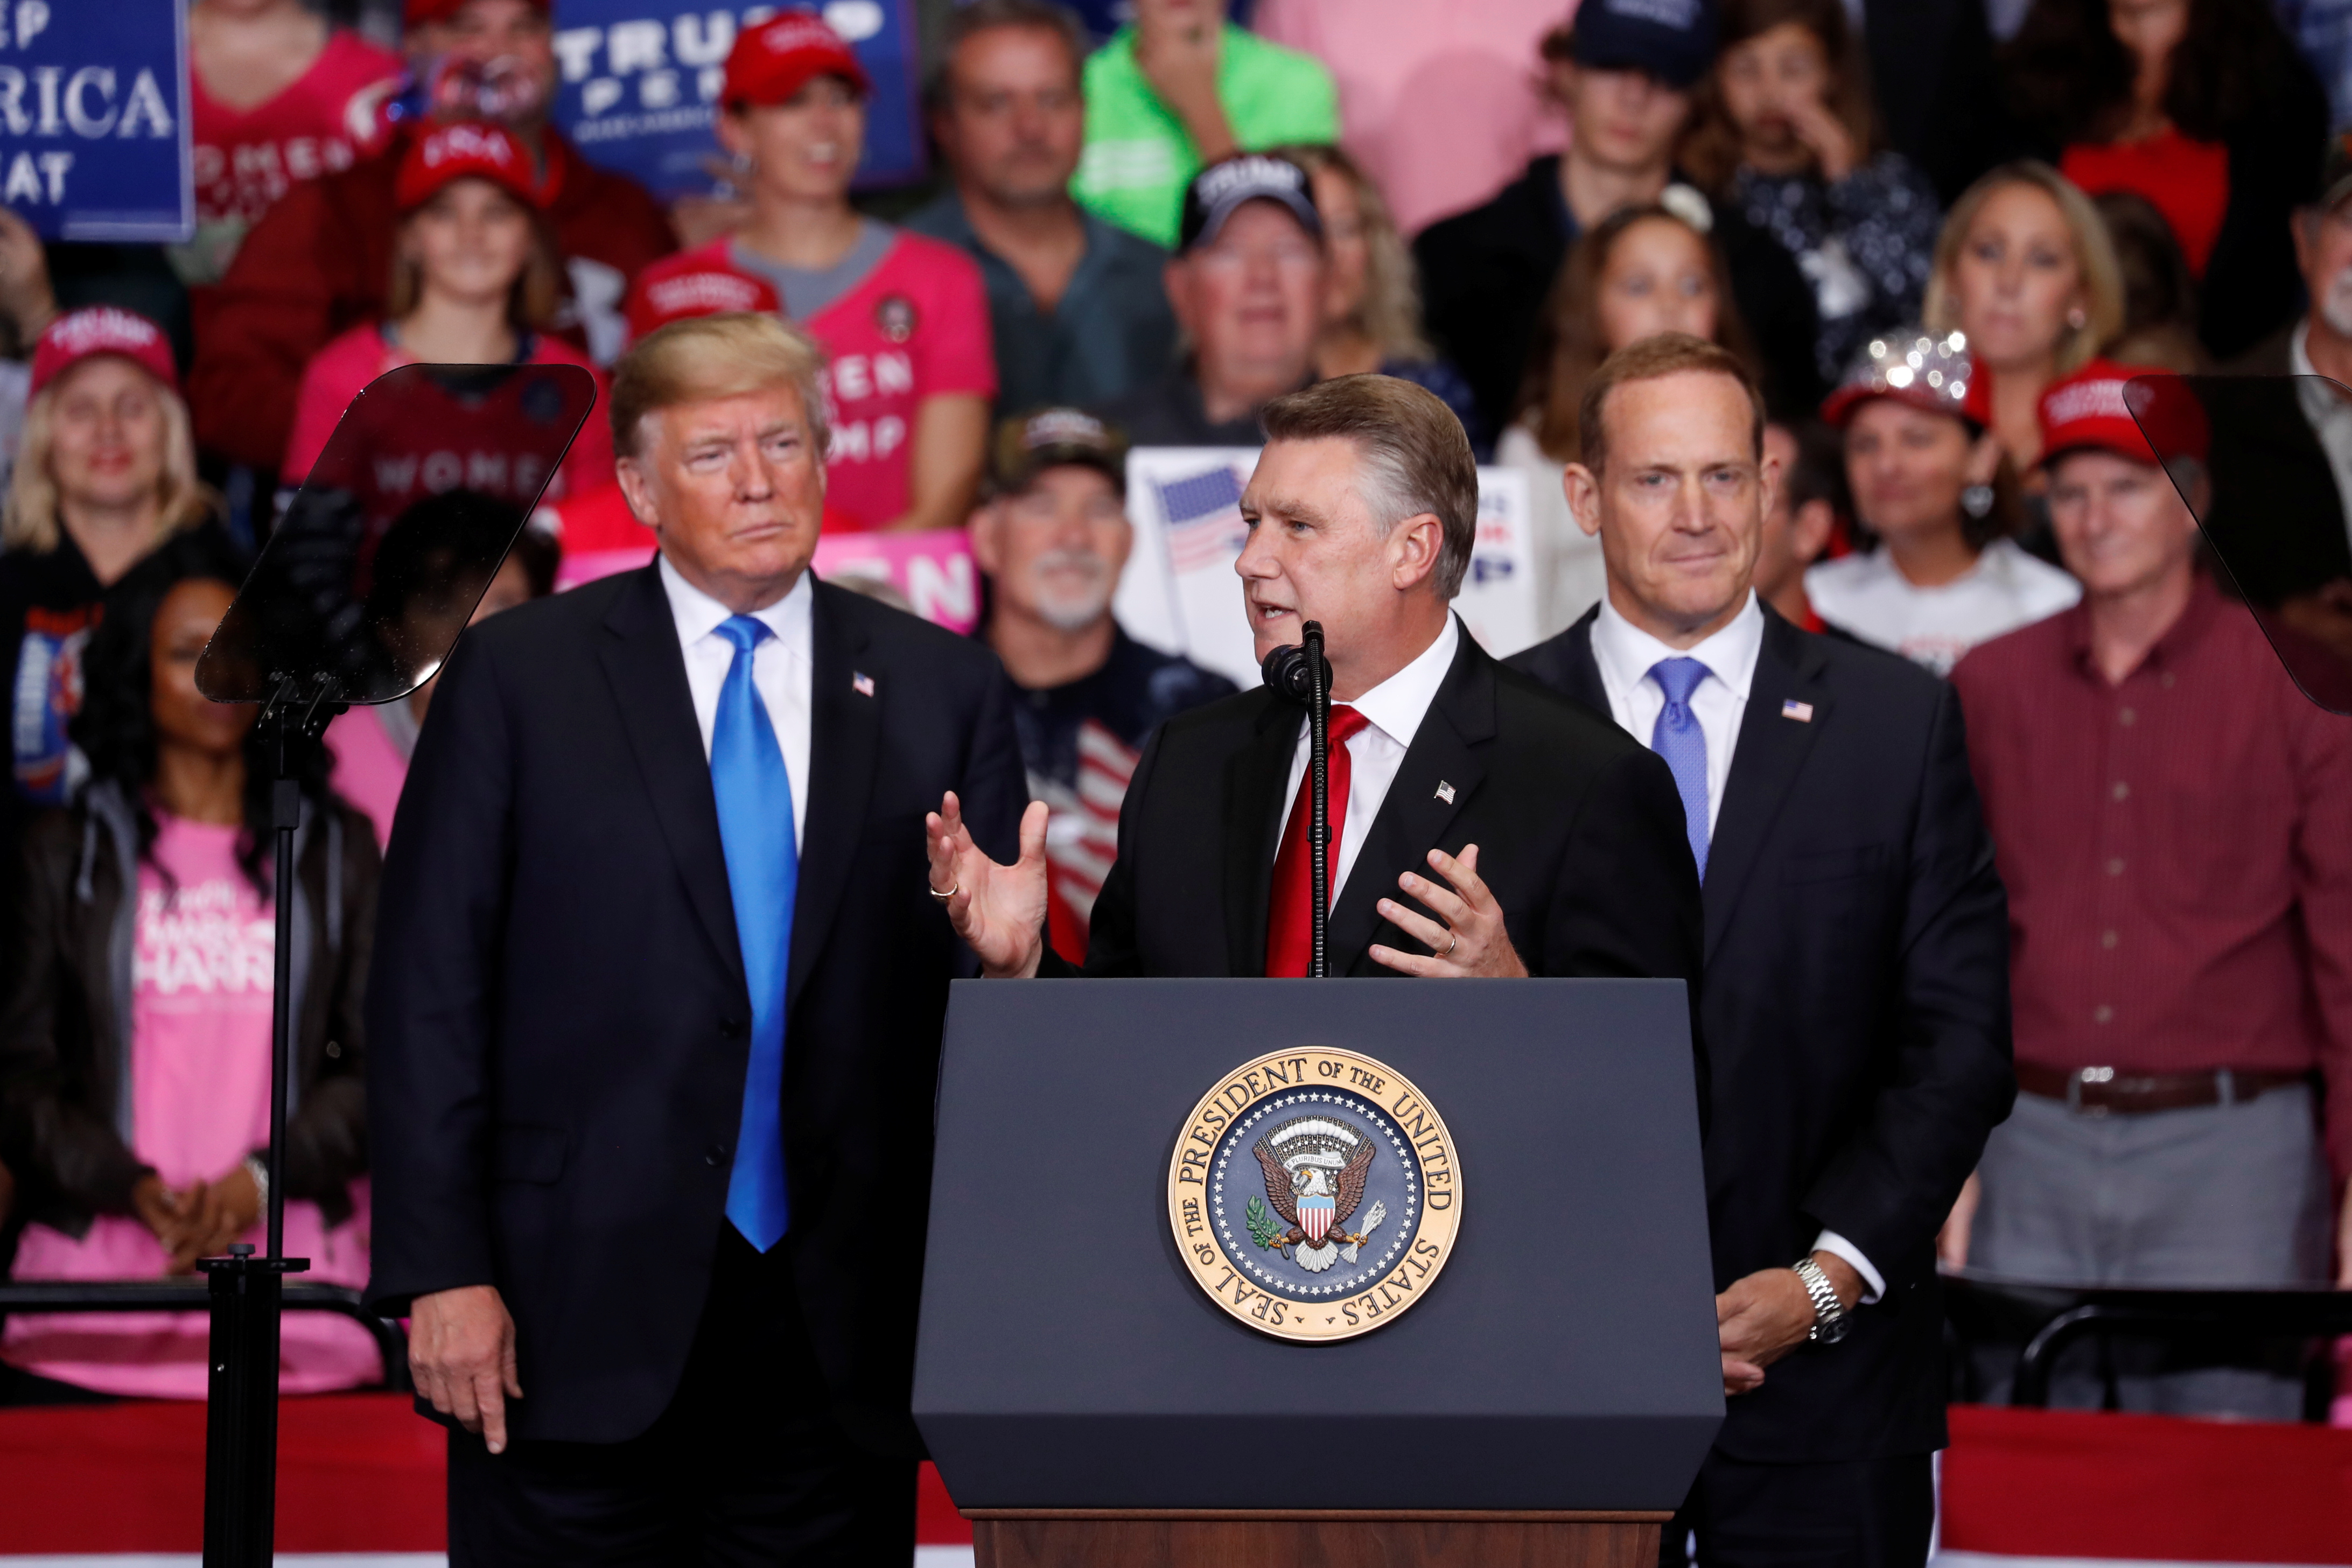 Harris, Republican candidate from North Carolina's 9th Congressional district speaks as U.S. President Trump looks on during a campaign rally in Charlotte